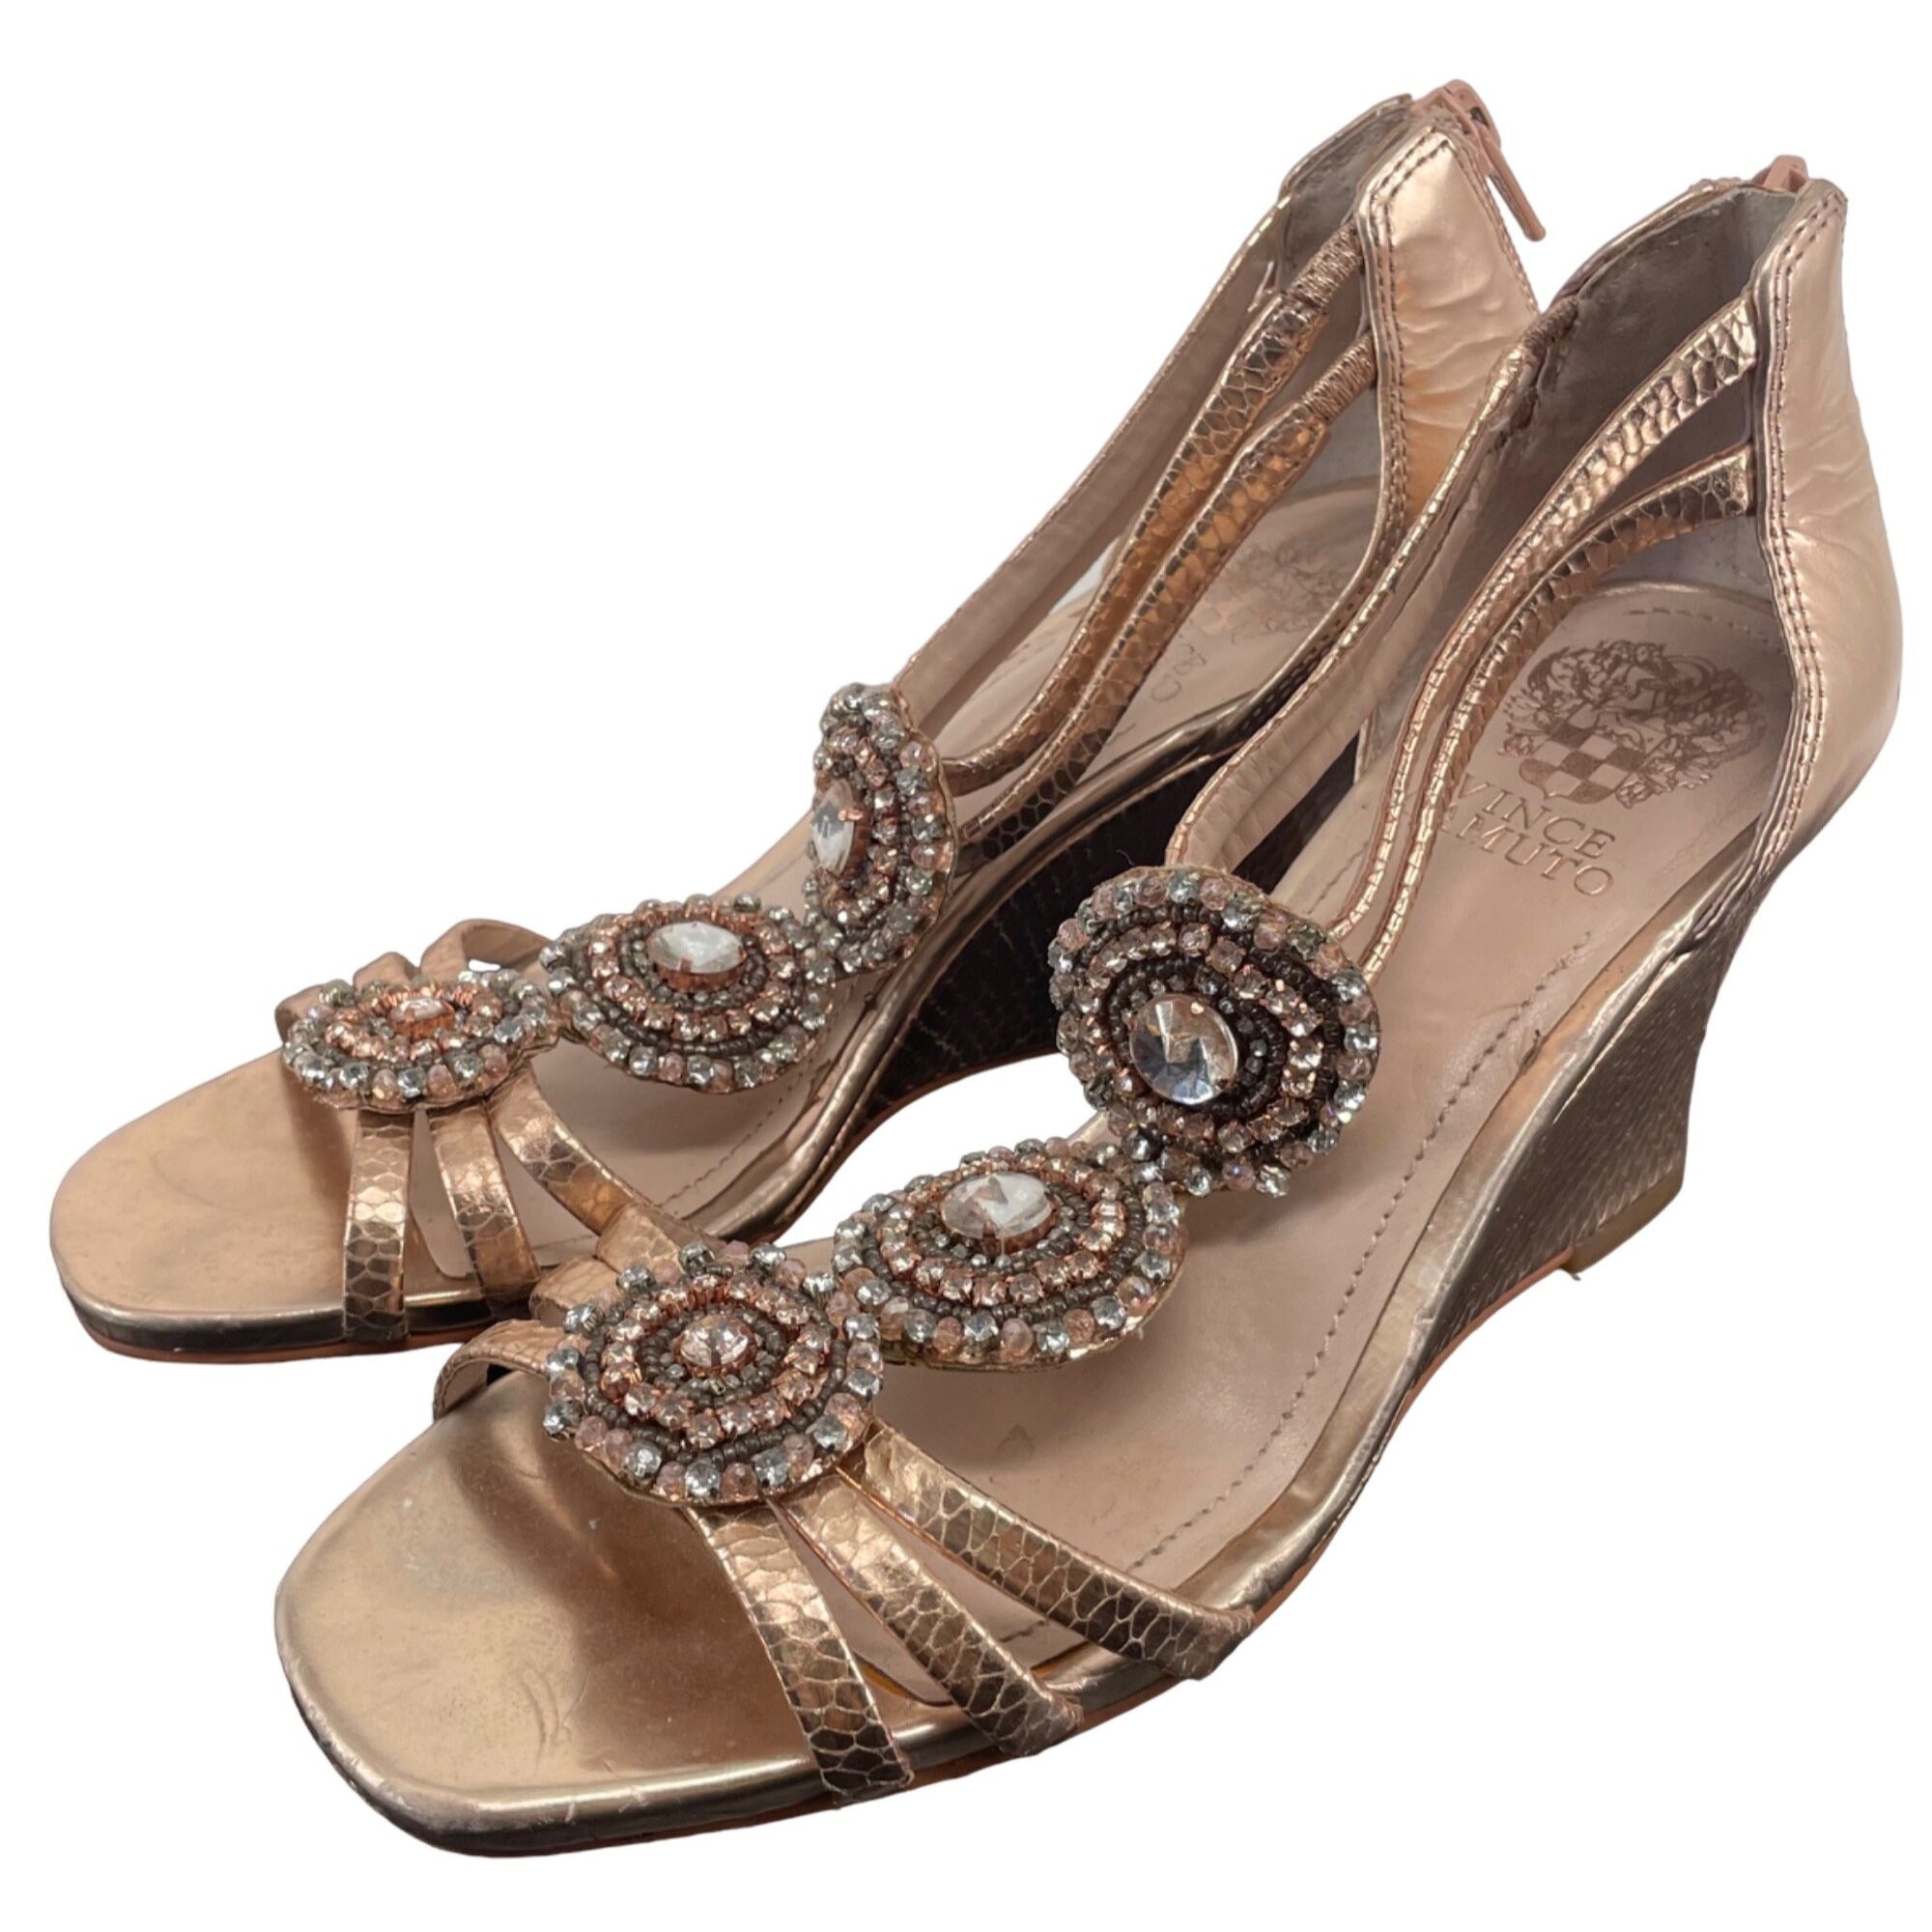 Vince Camuto Women's Size 8 Rose Gold Crystal Snakeskin Wedge Sandals